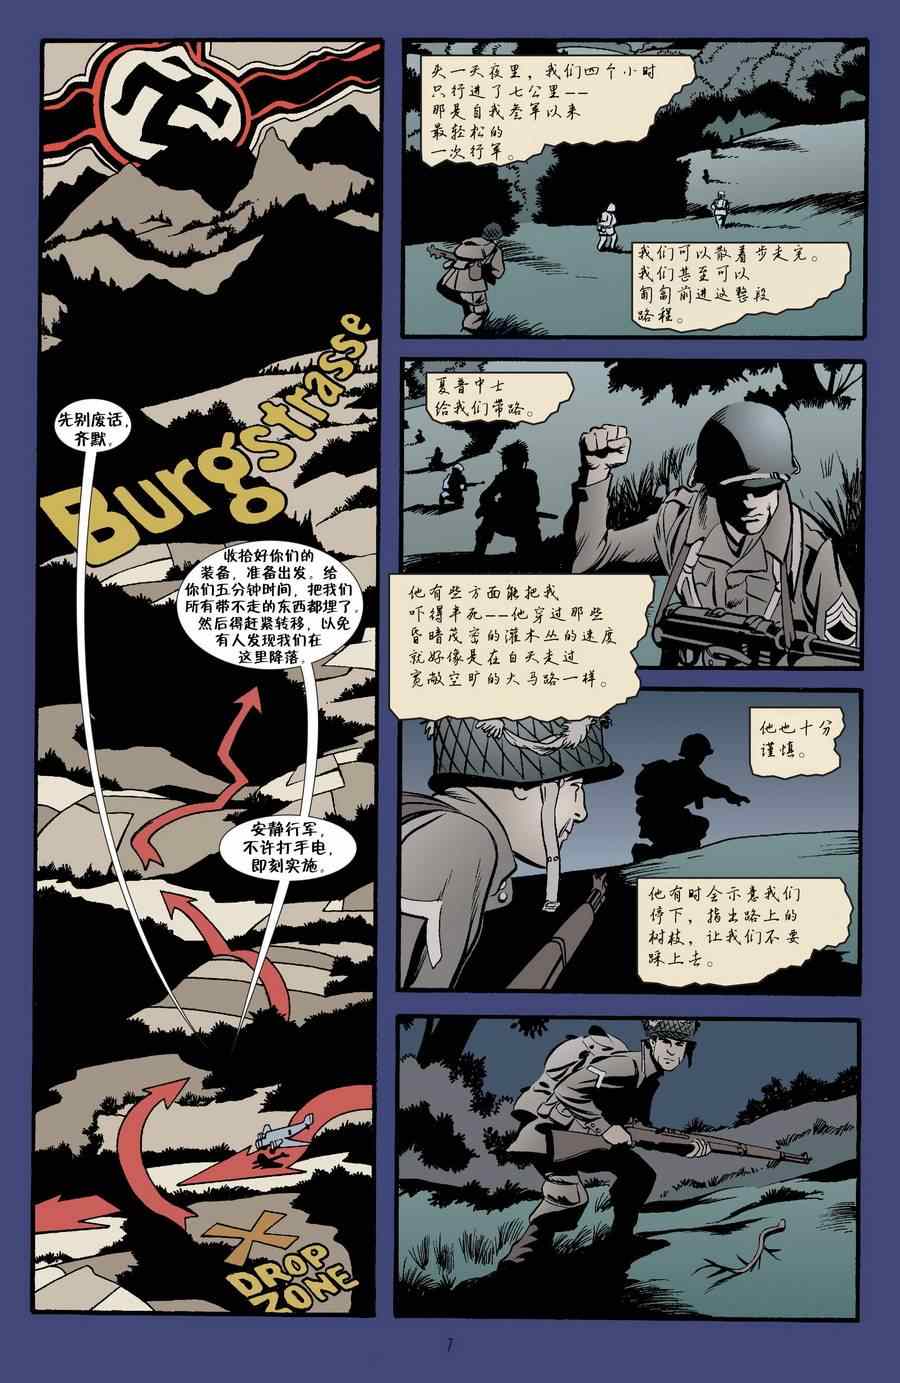 《Fables》漫画 028卷